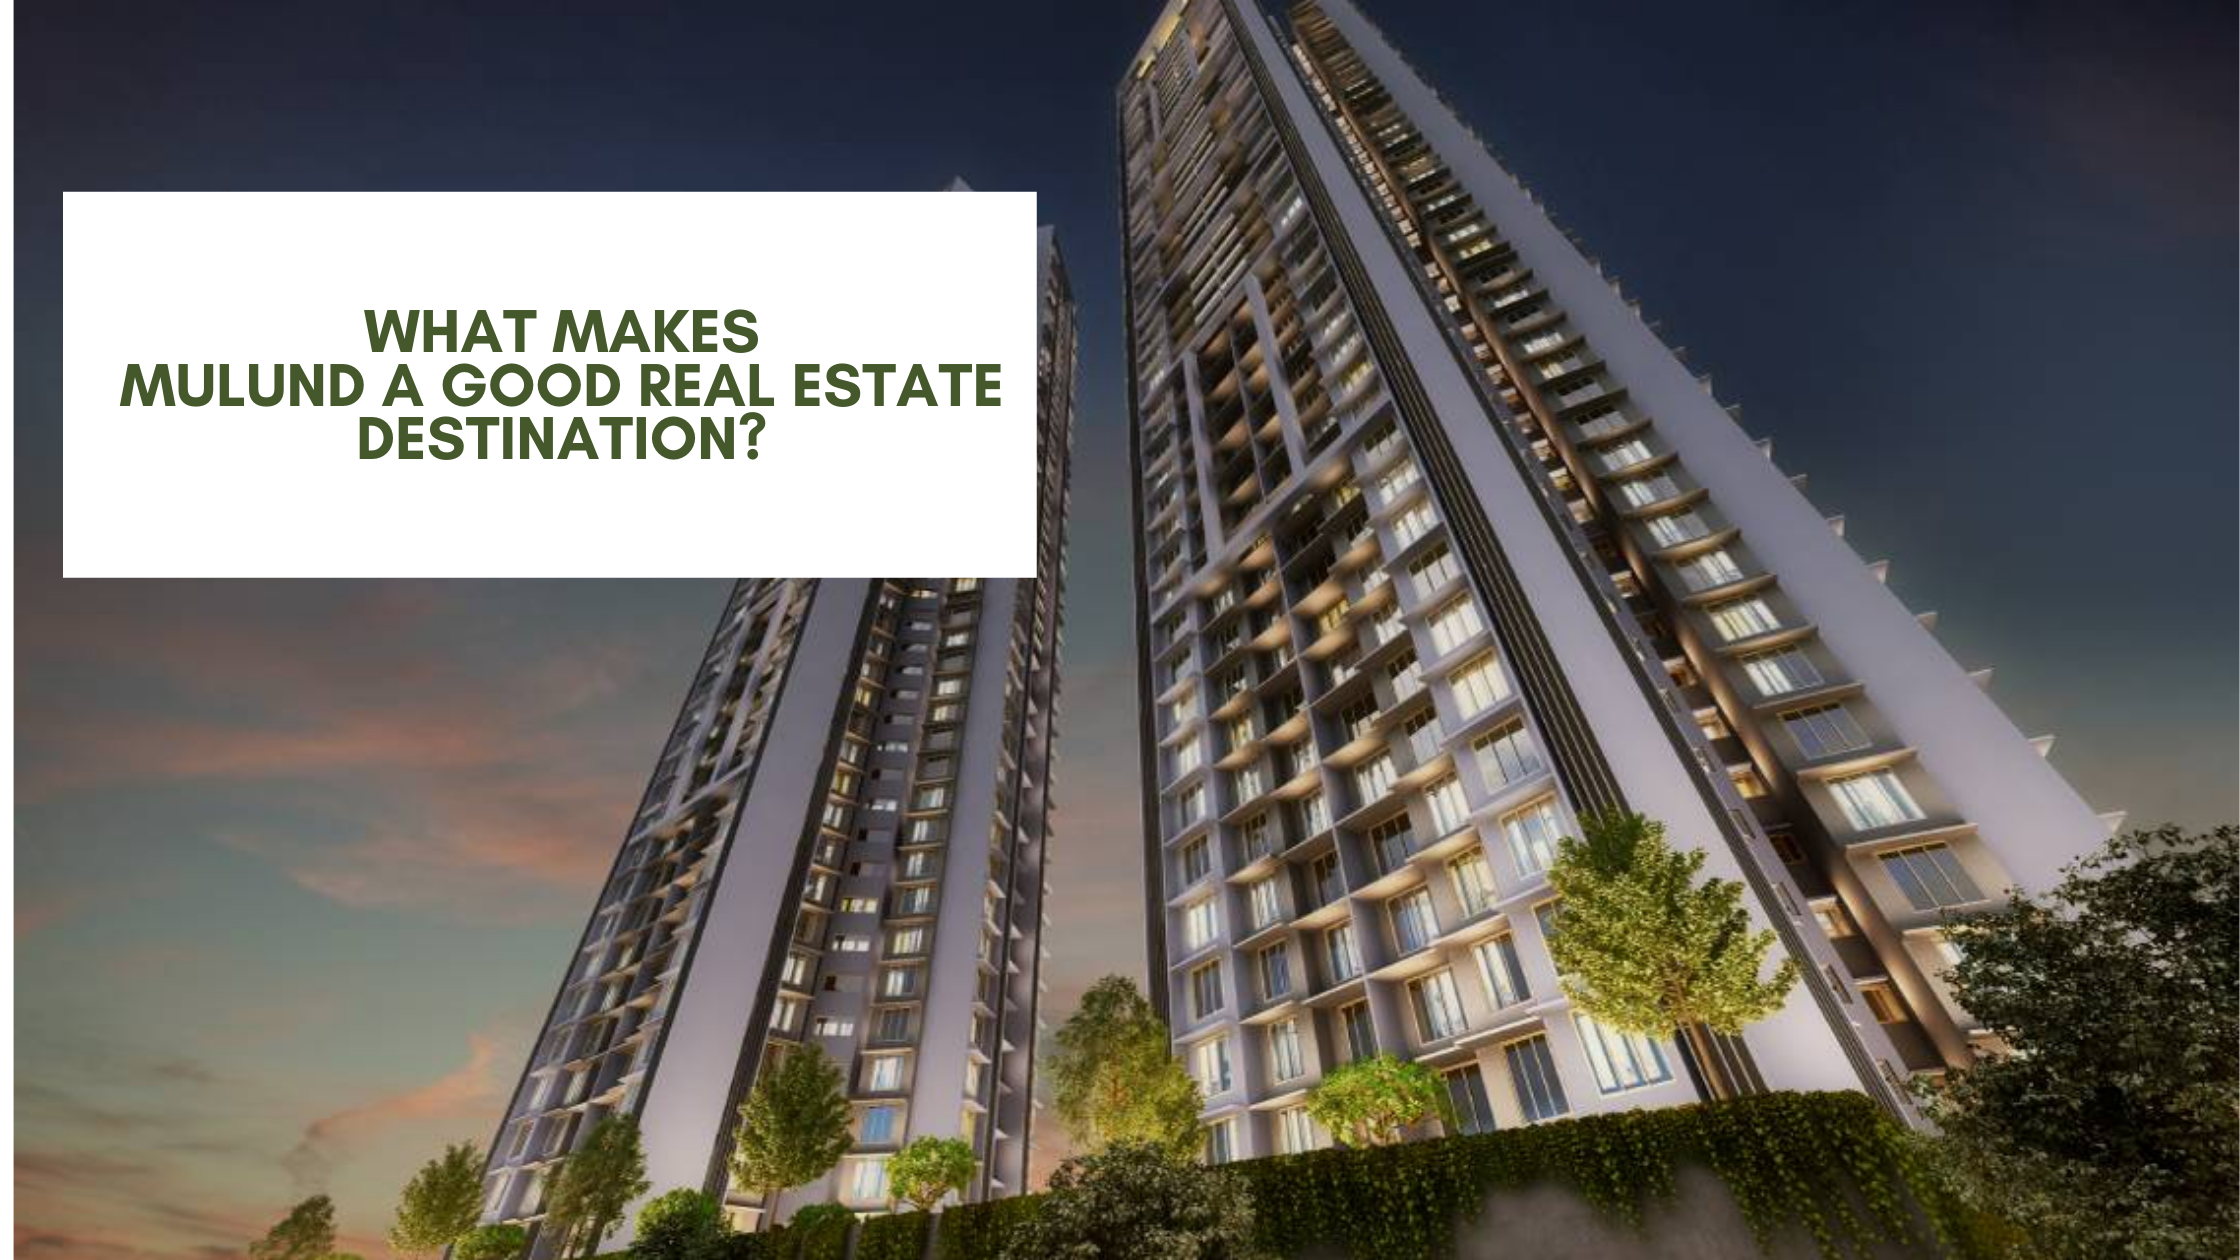 What makes Mulund a good real estate destination?